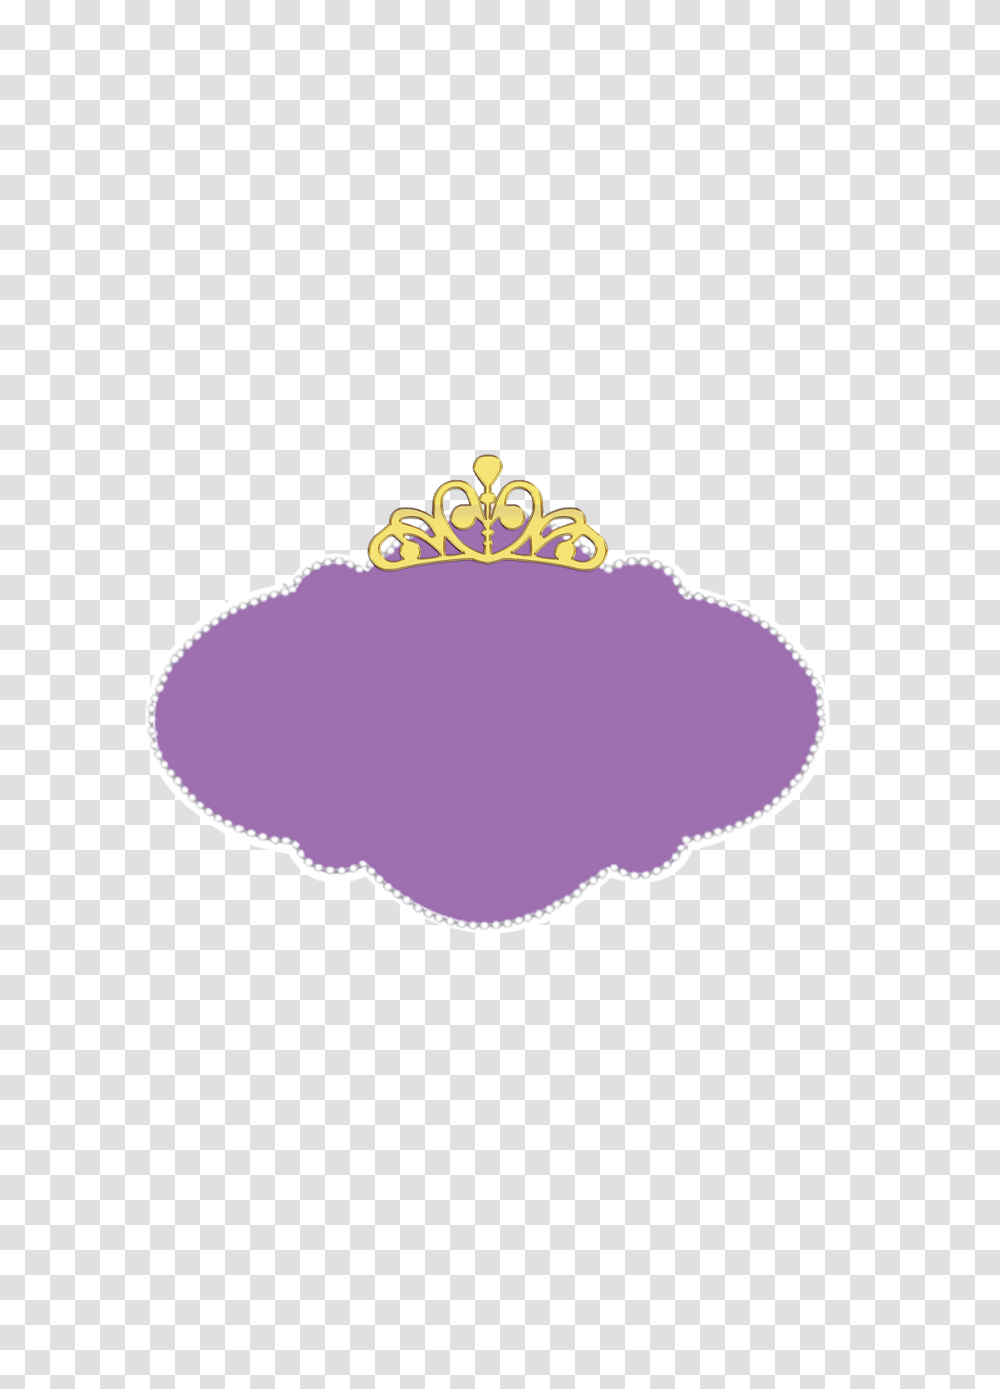 Sofia The First Crown Clipart Transparent Png